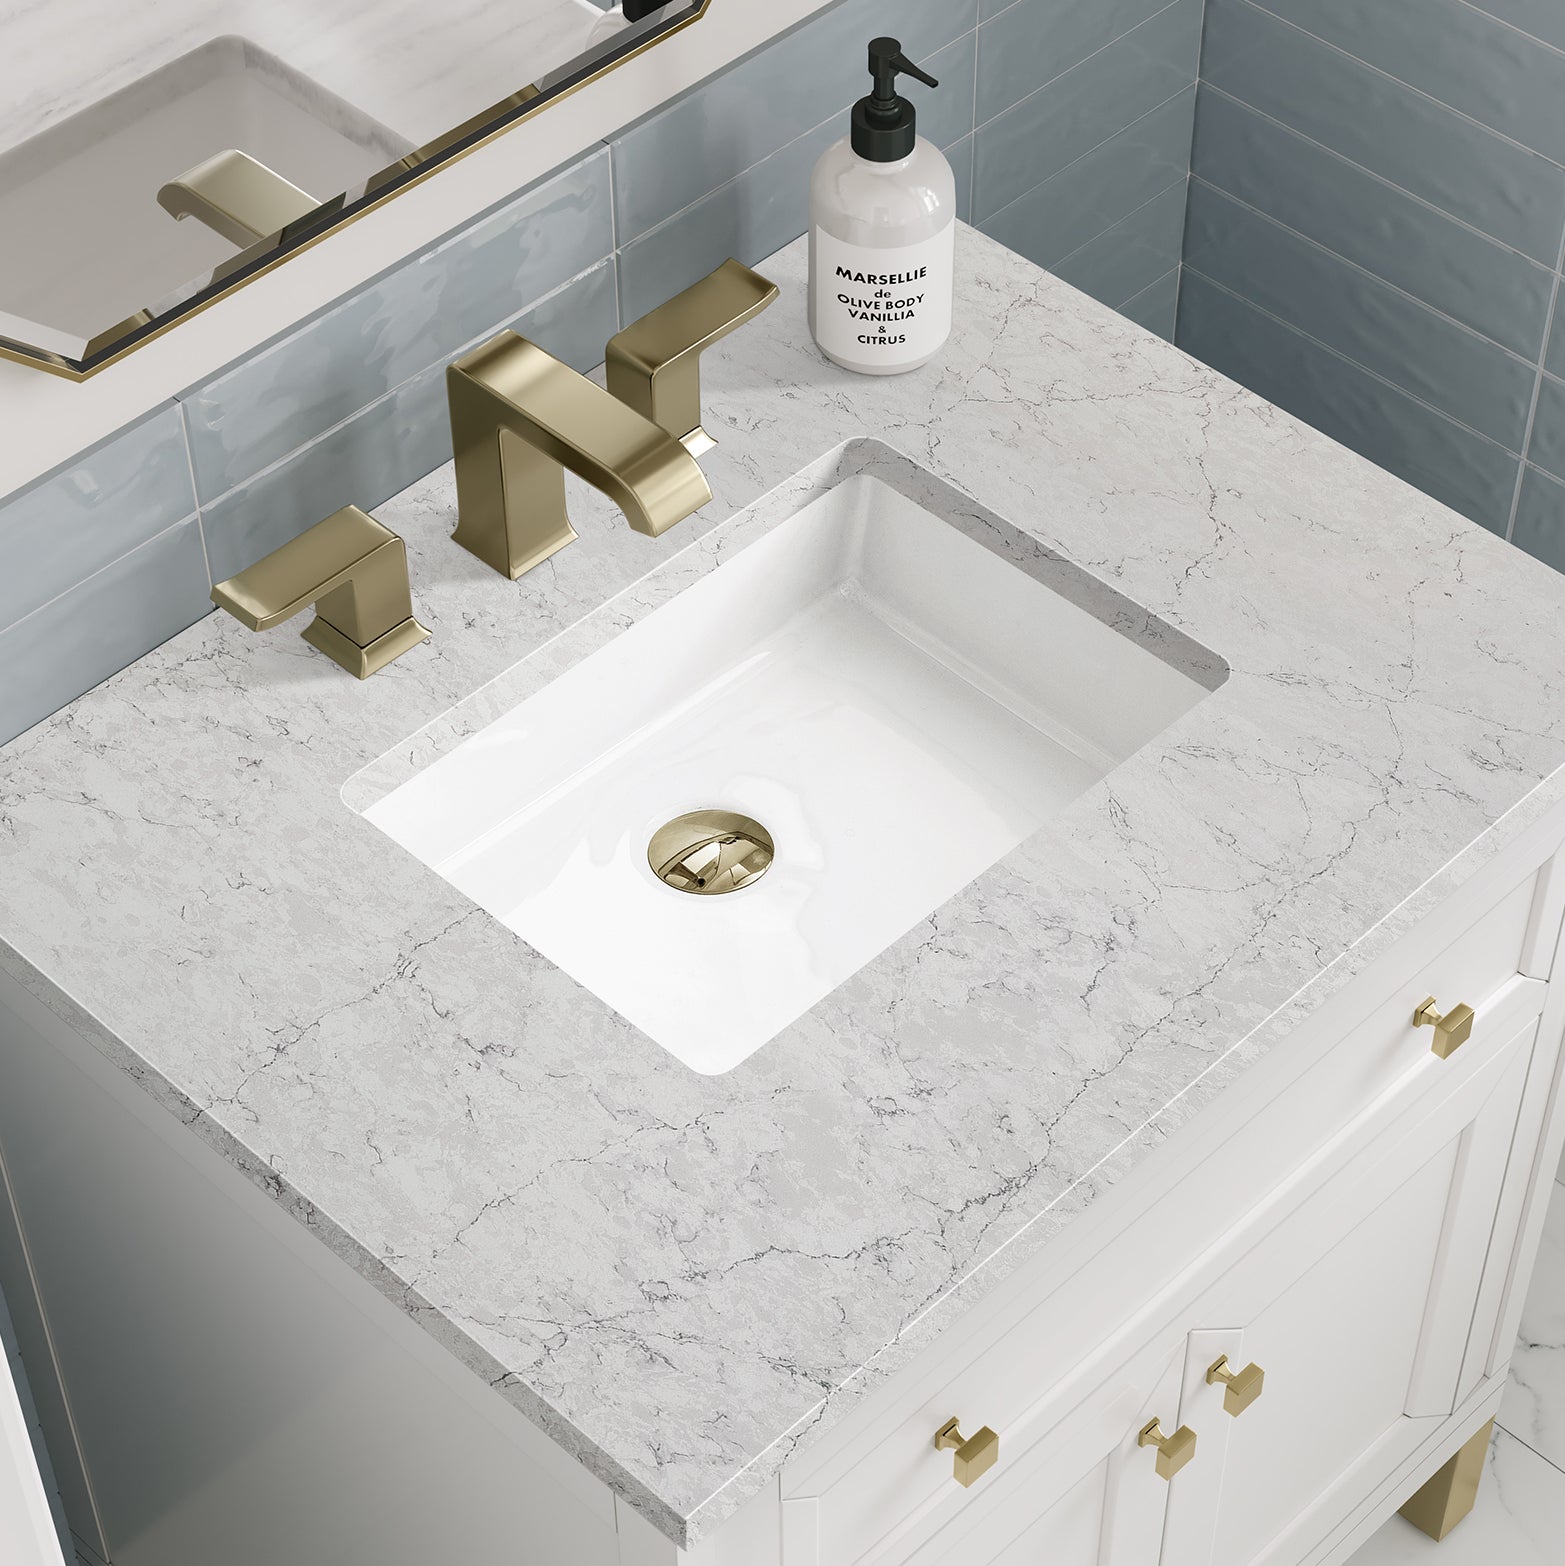 James Martin Vanities Chicago Collection 30 in. Single Vanity in Glossy White with Countertop Options